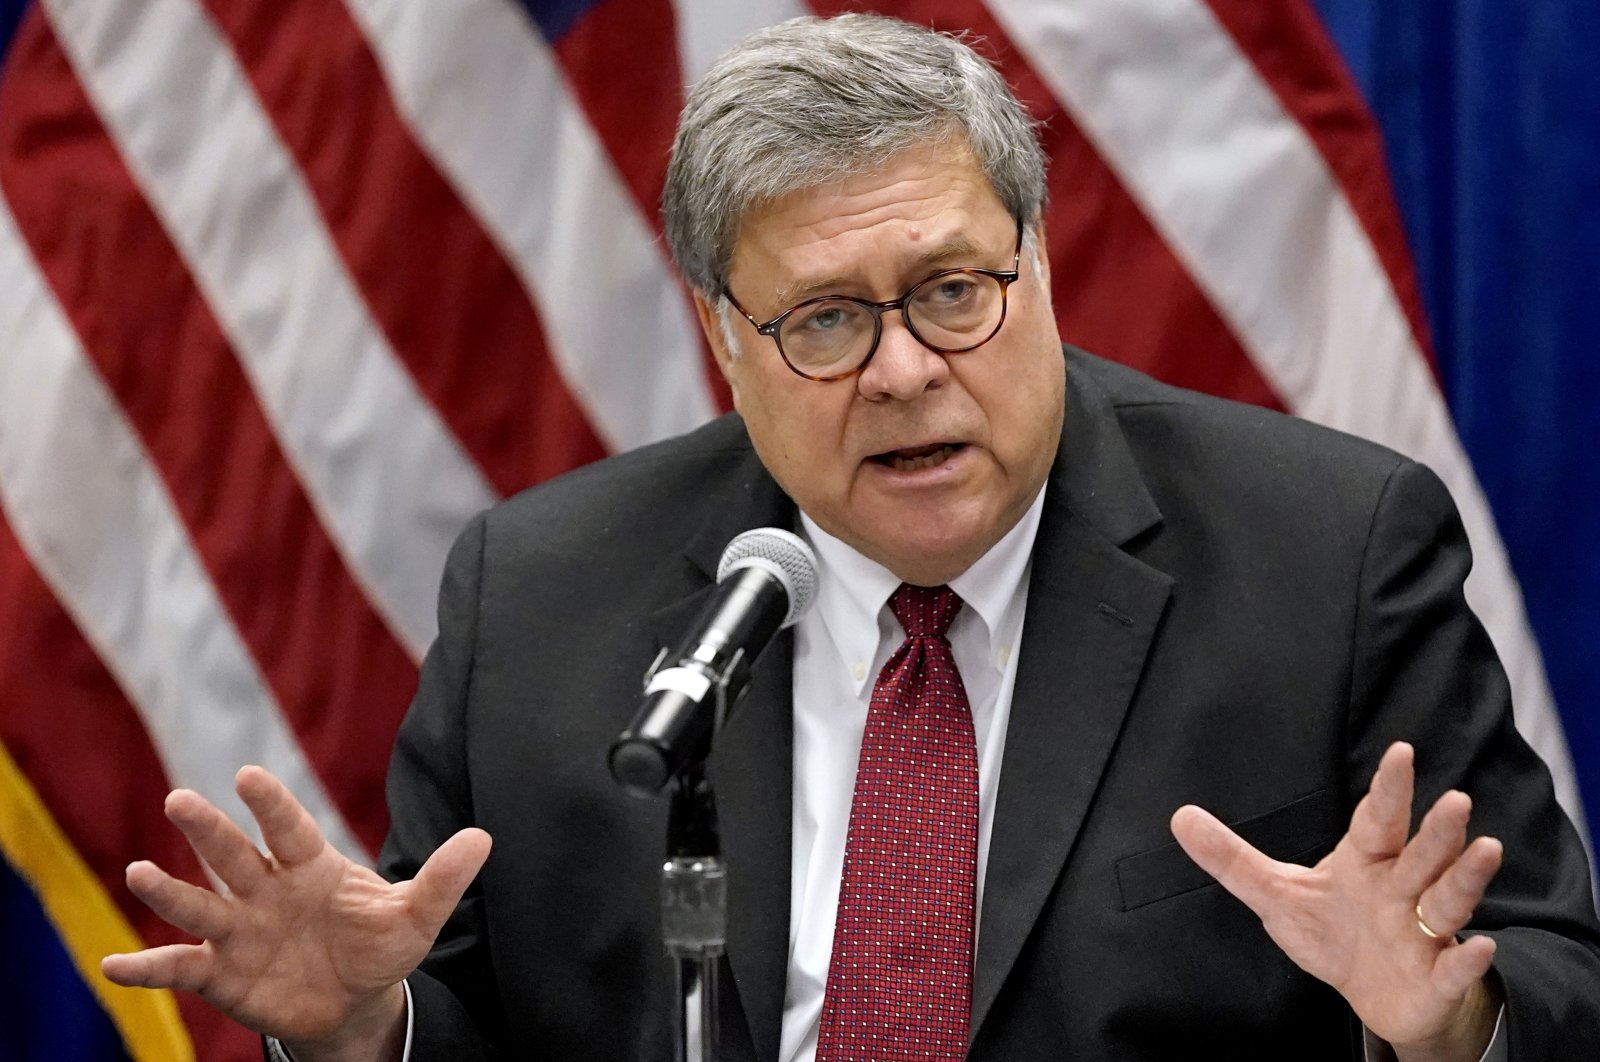 In this Oct. 15, 2020, file photo Attorney General William Barr speaks during a roundtable discussion on Operation Legend, a federal program to help cities combat violent crime in St. Louis. (AP Photo)